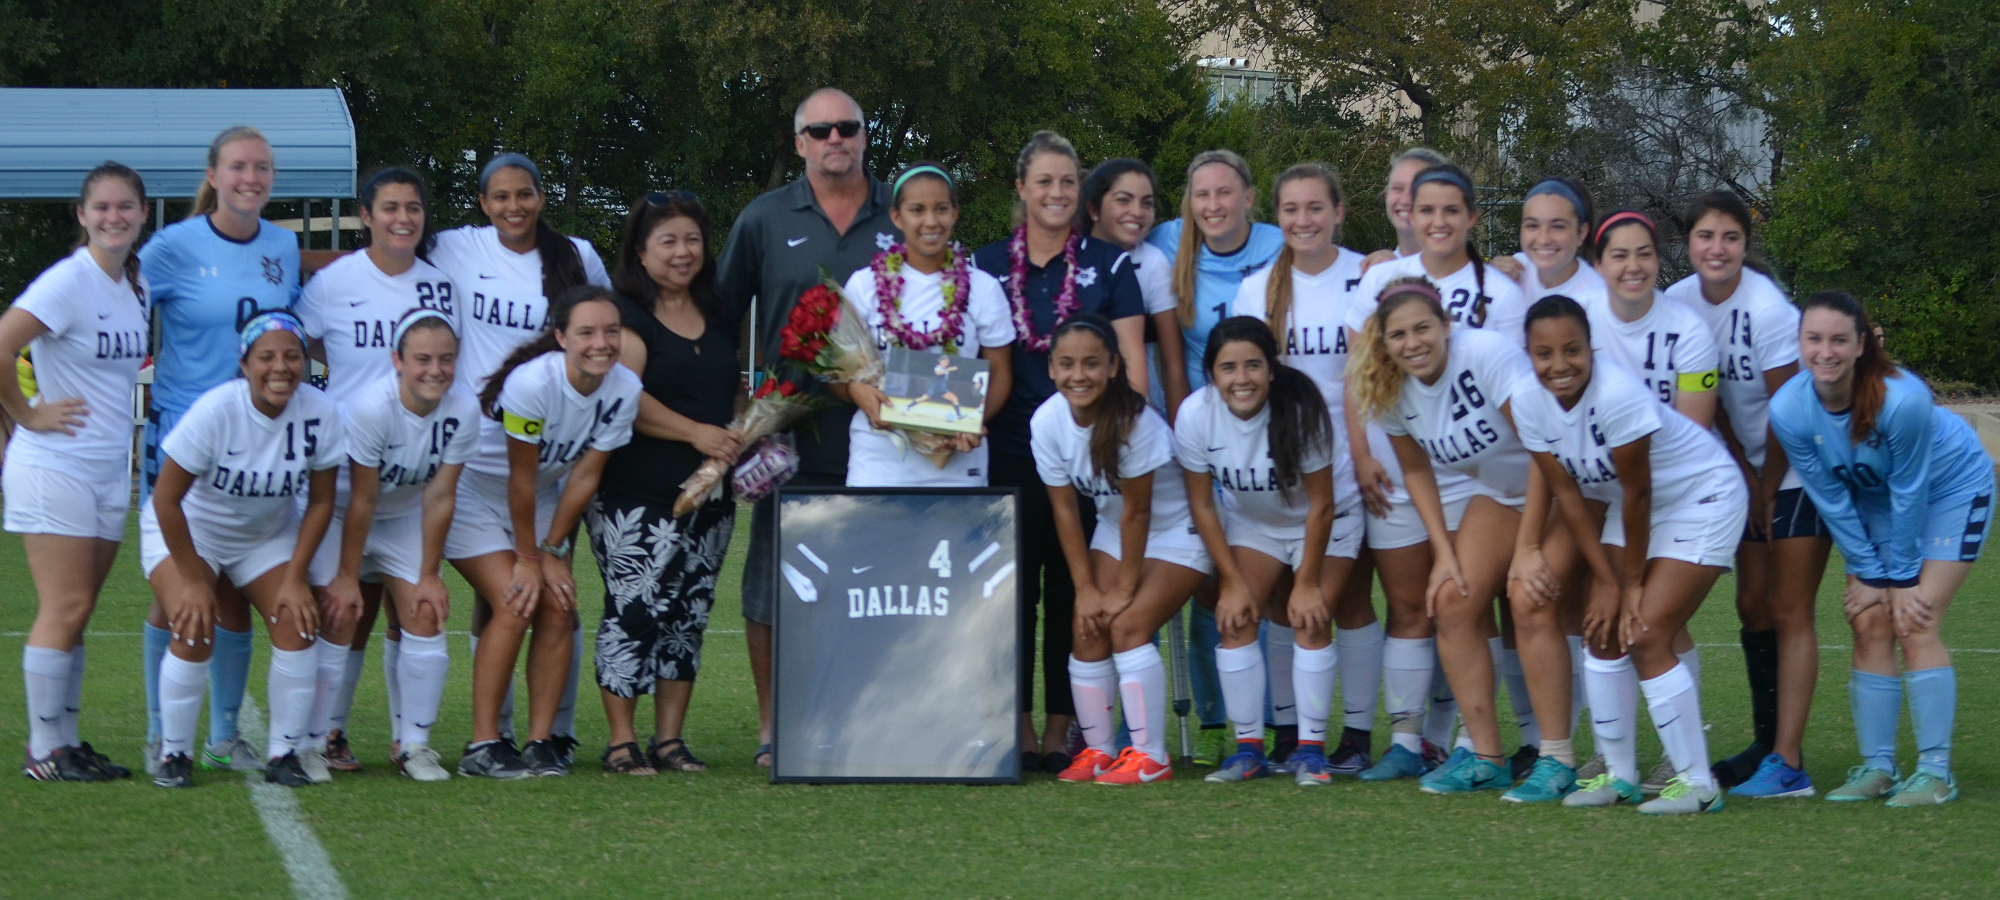 Women's Soccer unable to get Win on Senior Day